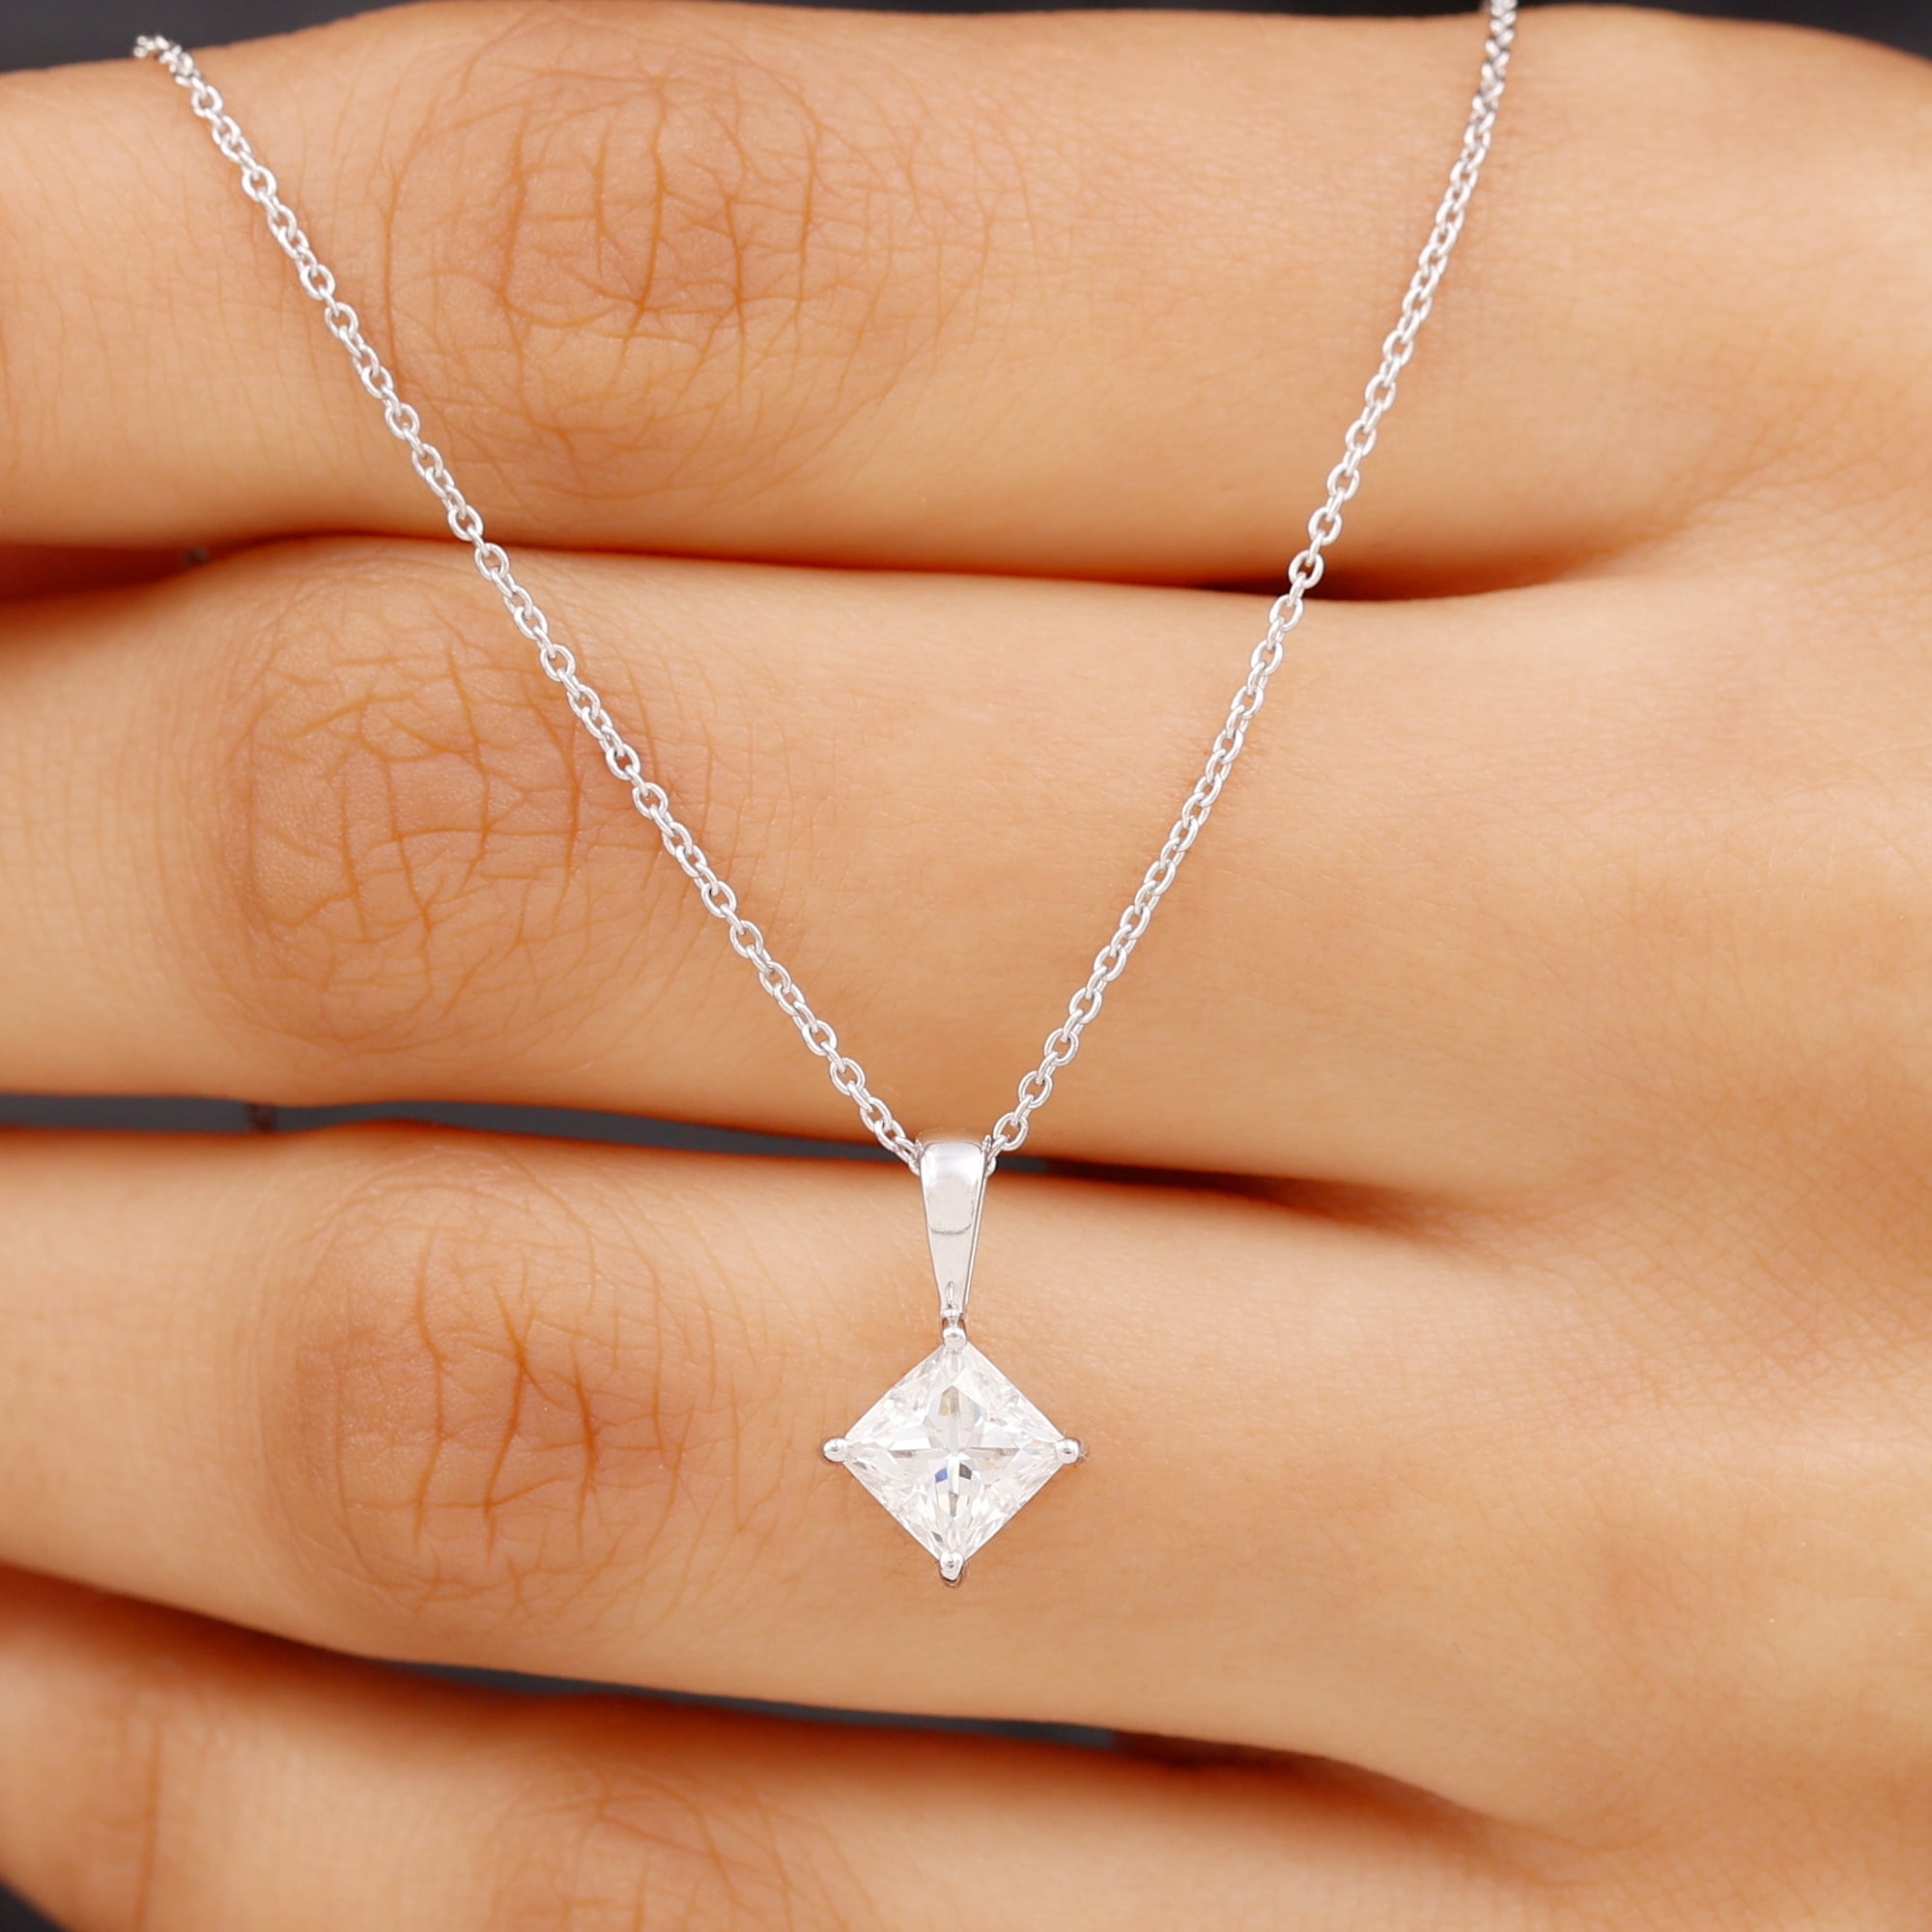 1Ct Moissanite Solitaire Pendant Necklace And Chain Solid 14k White Gold 